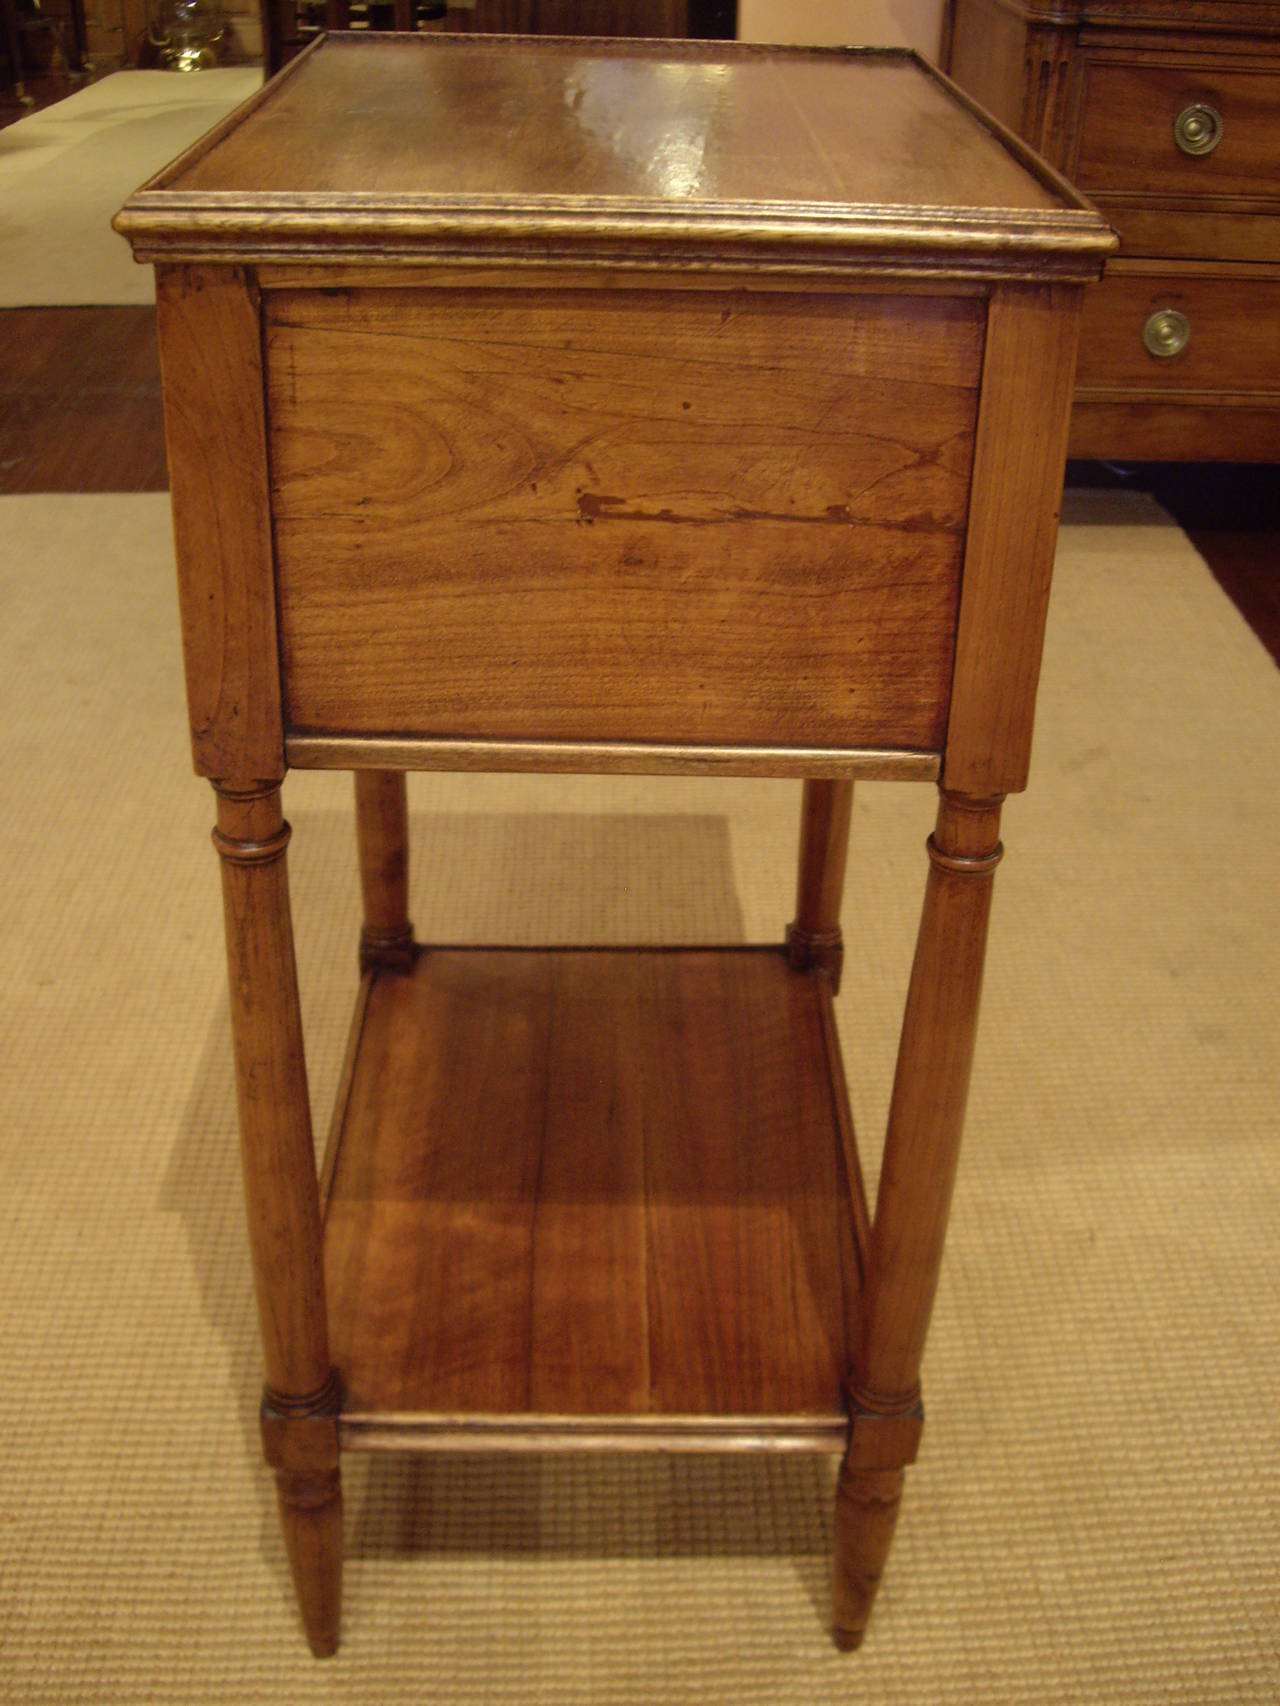 French Provincial 19th century two-drawer side table with one shelf.